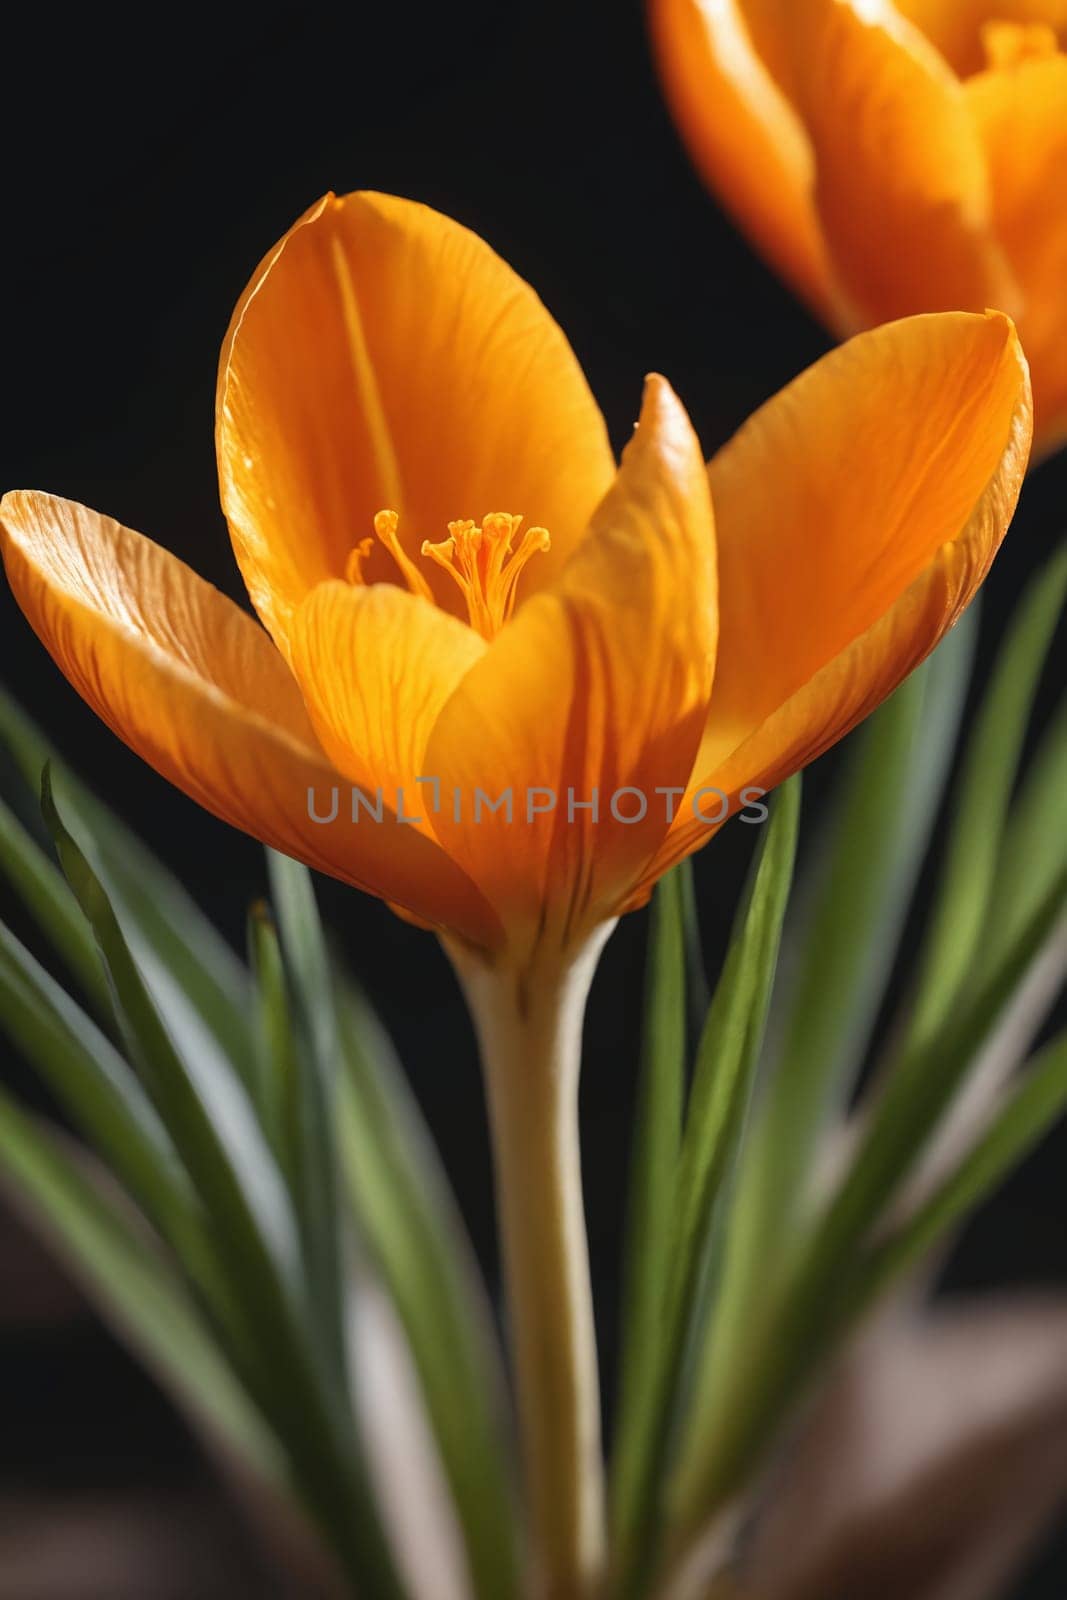 A Herald of Spring: The Beautiful Crocus Flower. by Andre1ns